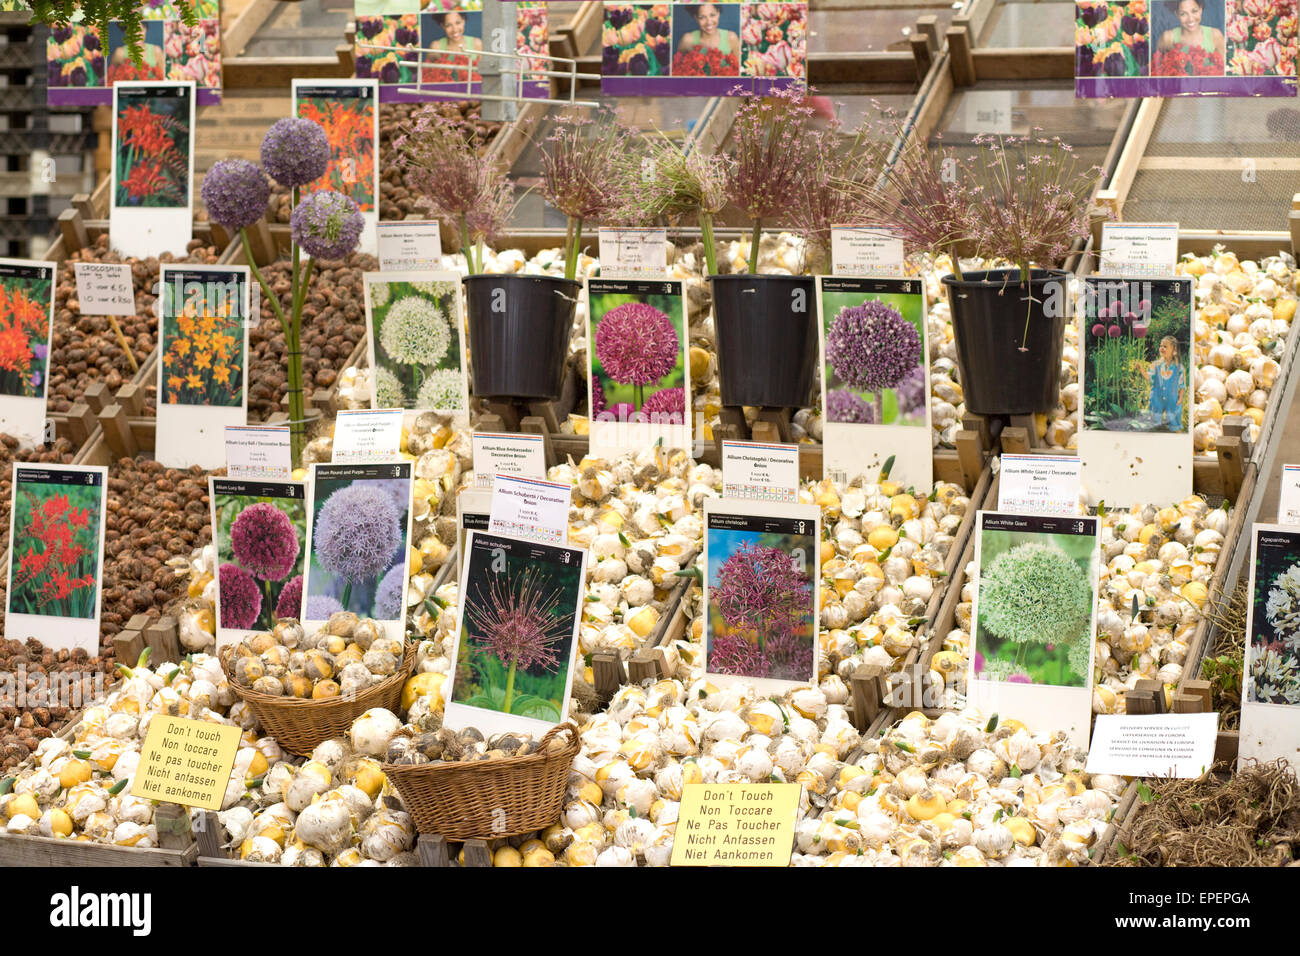 Assortment of Flower Bulbs on sale at a Dutch market stall Stock Photo